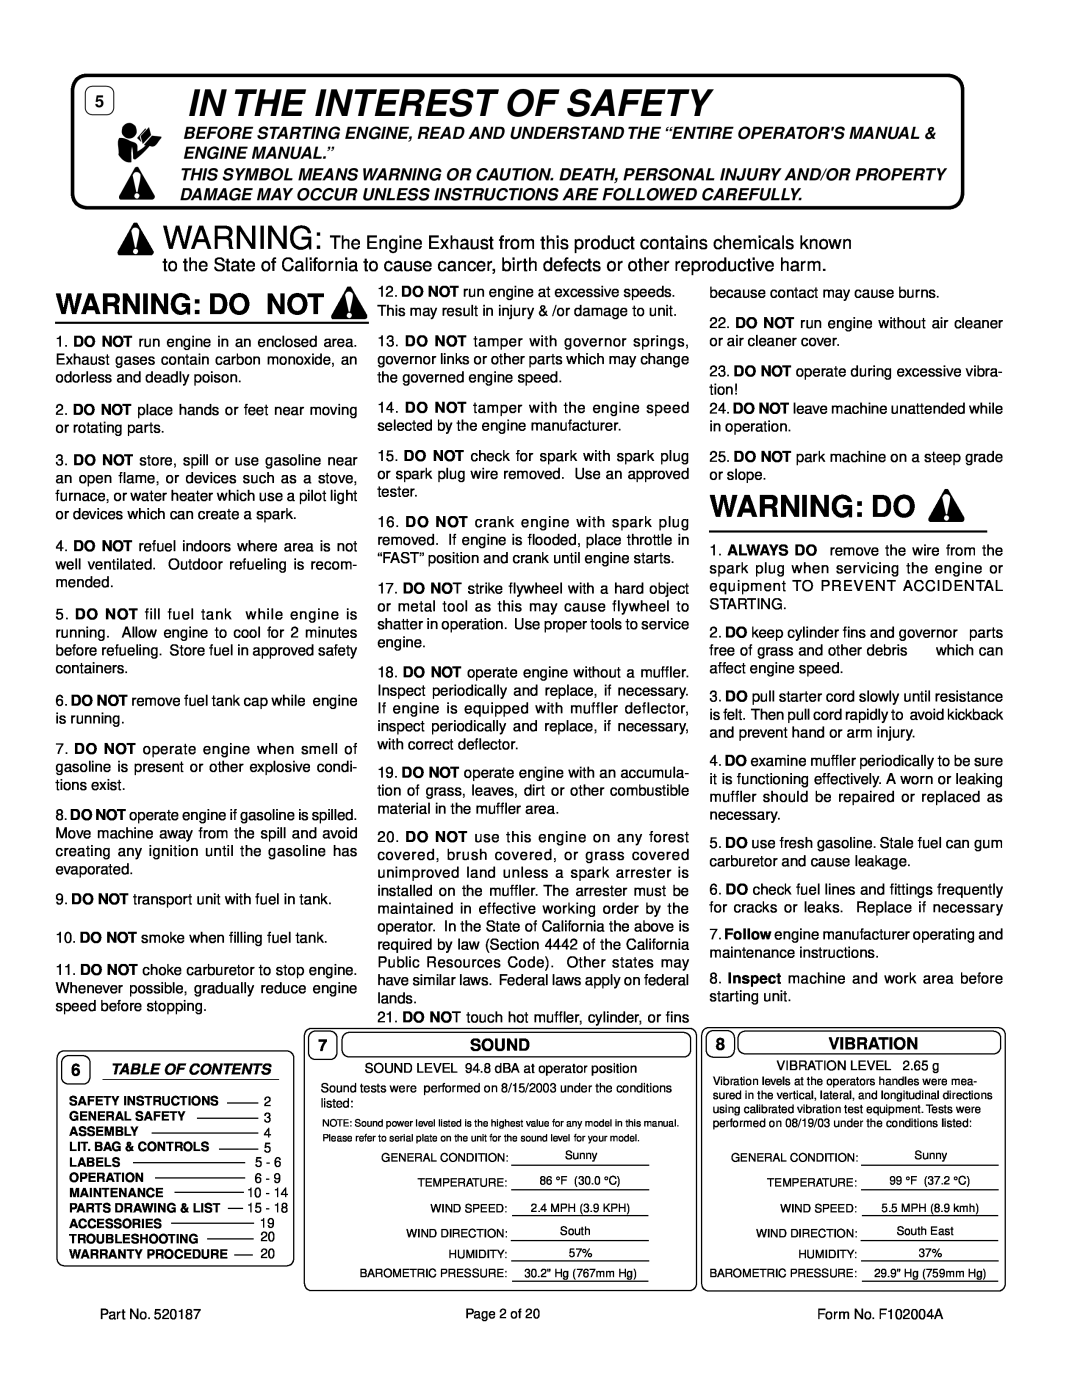 Billy Goat FM3301E owner manual In The Interest Of Safety, Warning Do Not 